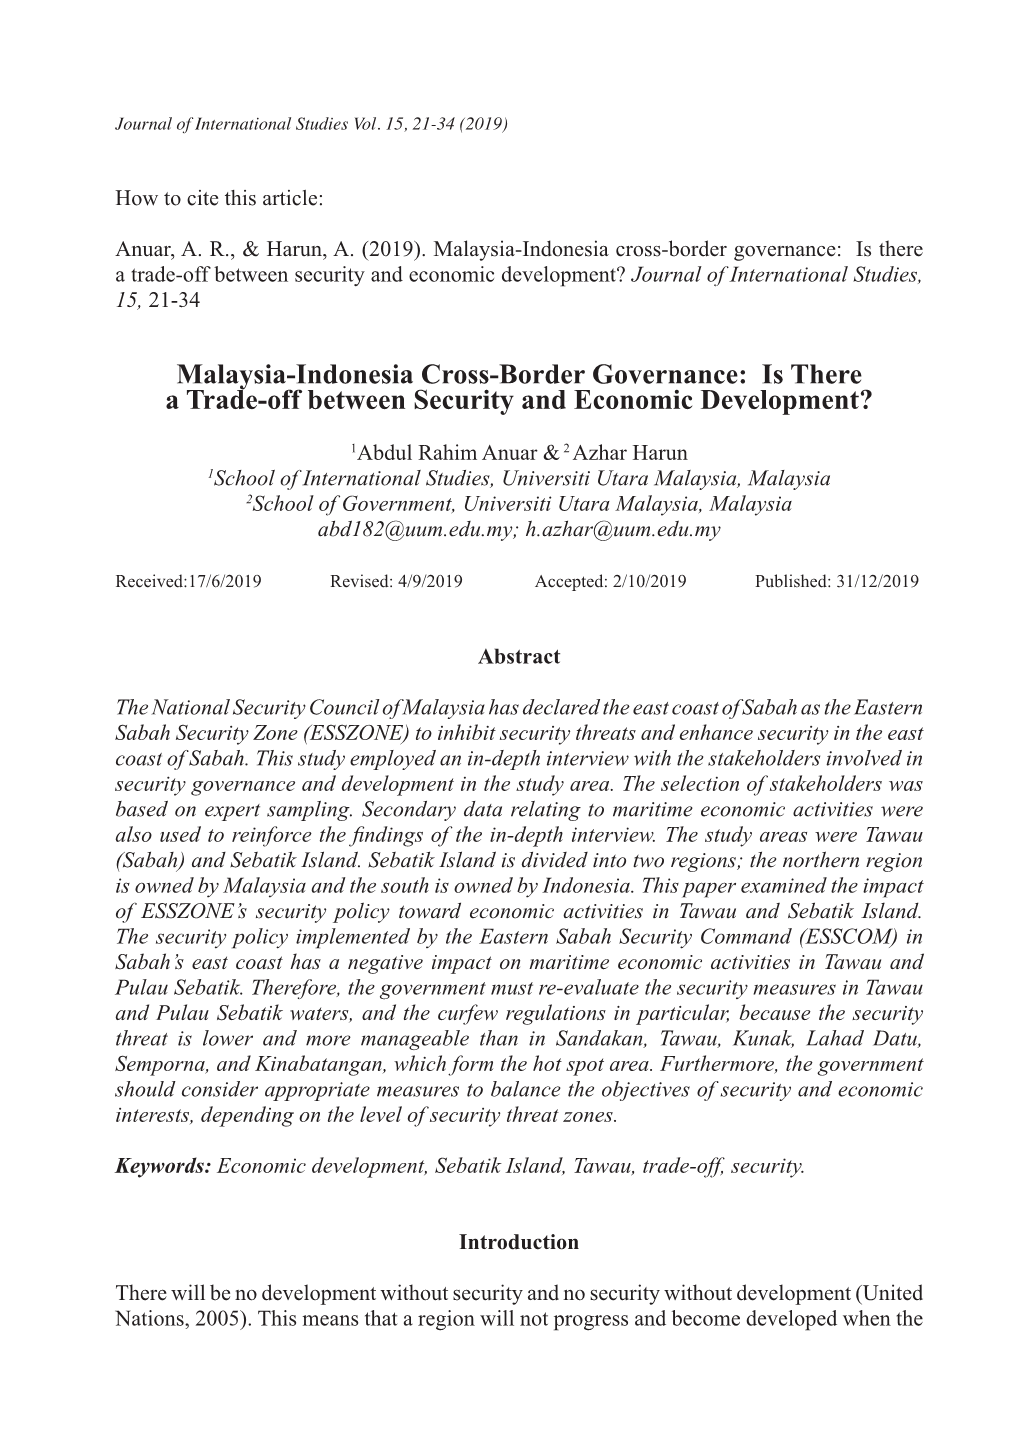 Malaysia-Indonesia Cross-Border Governance: Is There a Trade-Off Between Security and Economic Development? Journal of International Studies, 15, 21-34